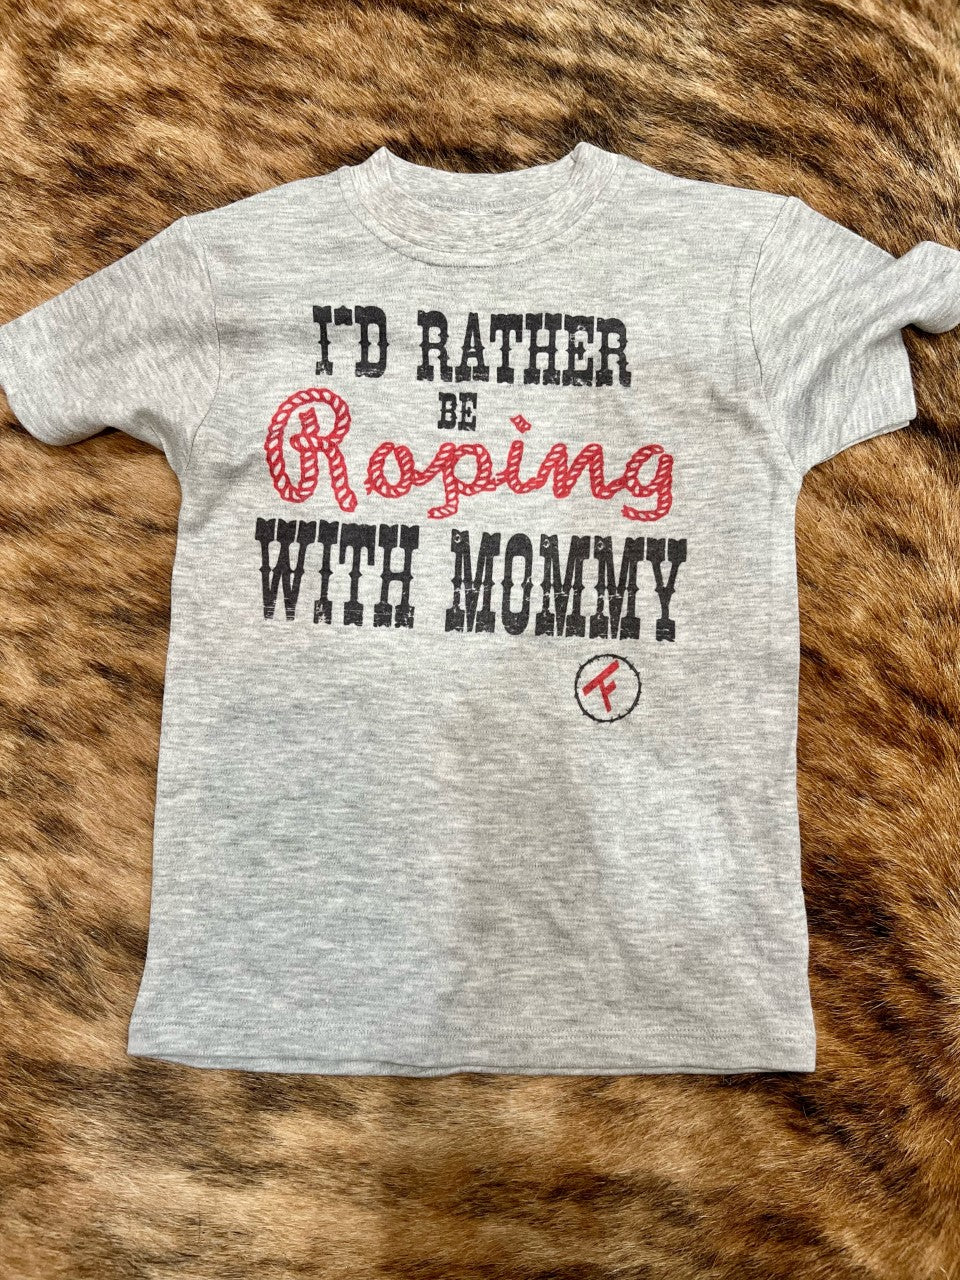 Rather be Roping with Mommy Tee